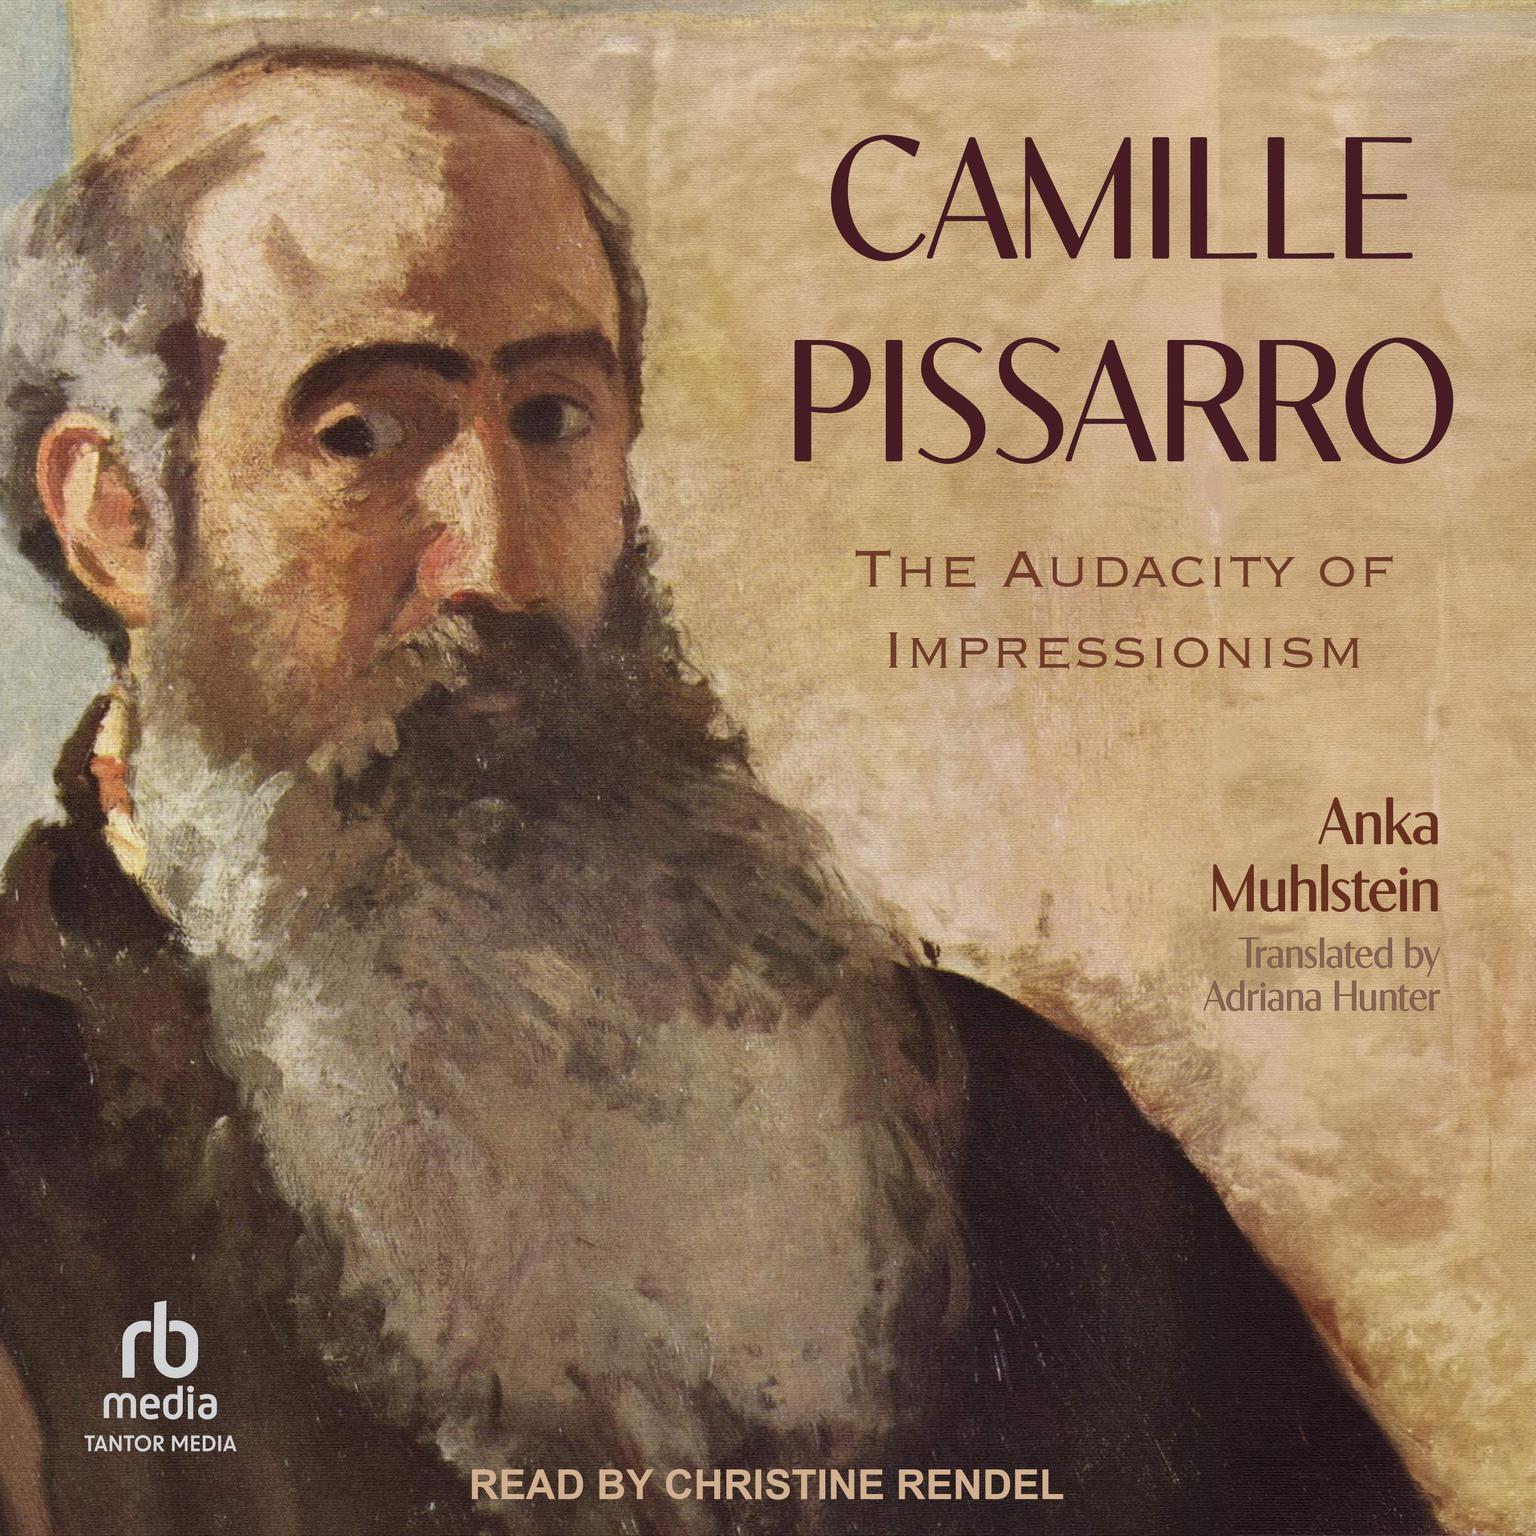 Camille Pissarro: The Audacity of Impressionism Audiobook, by Anka Muhlstein